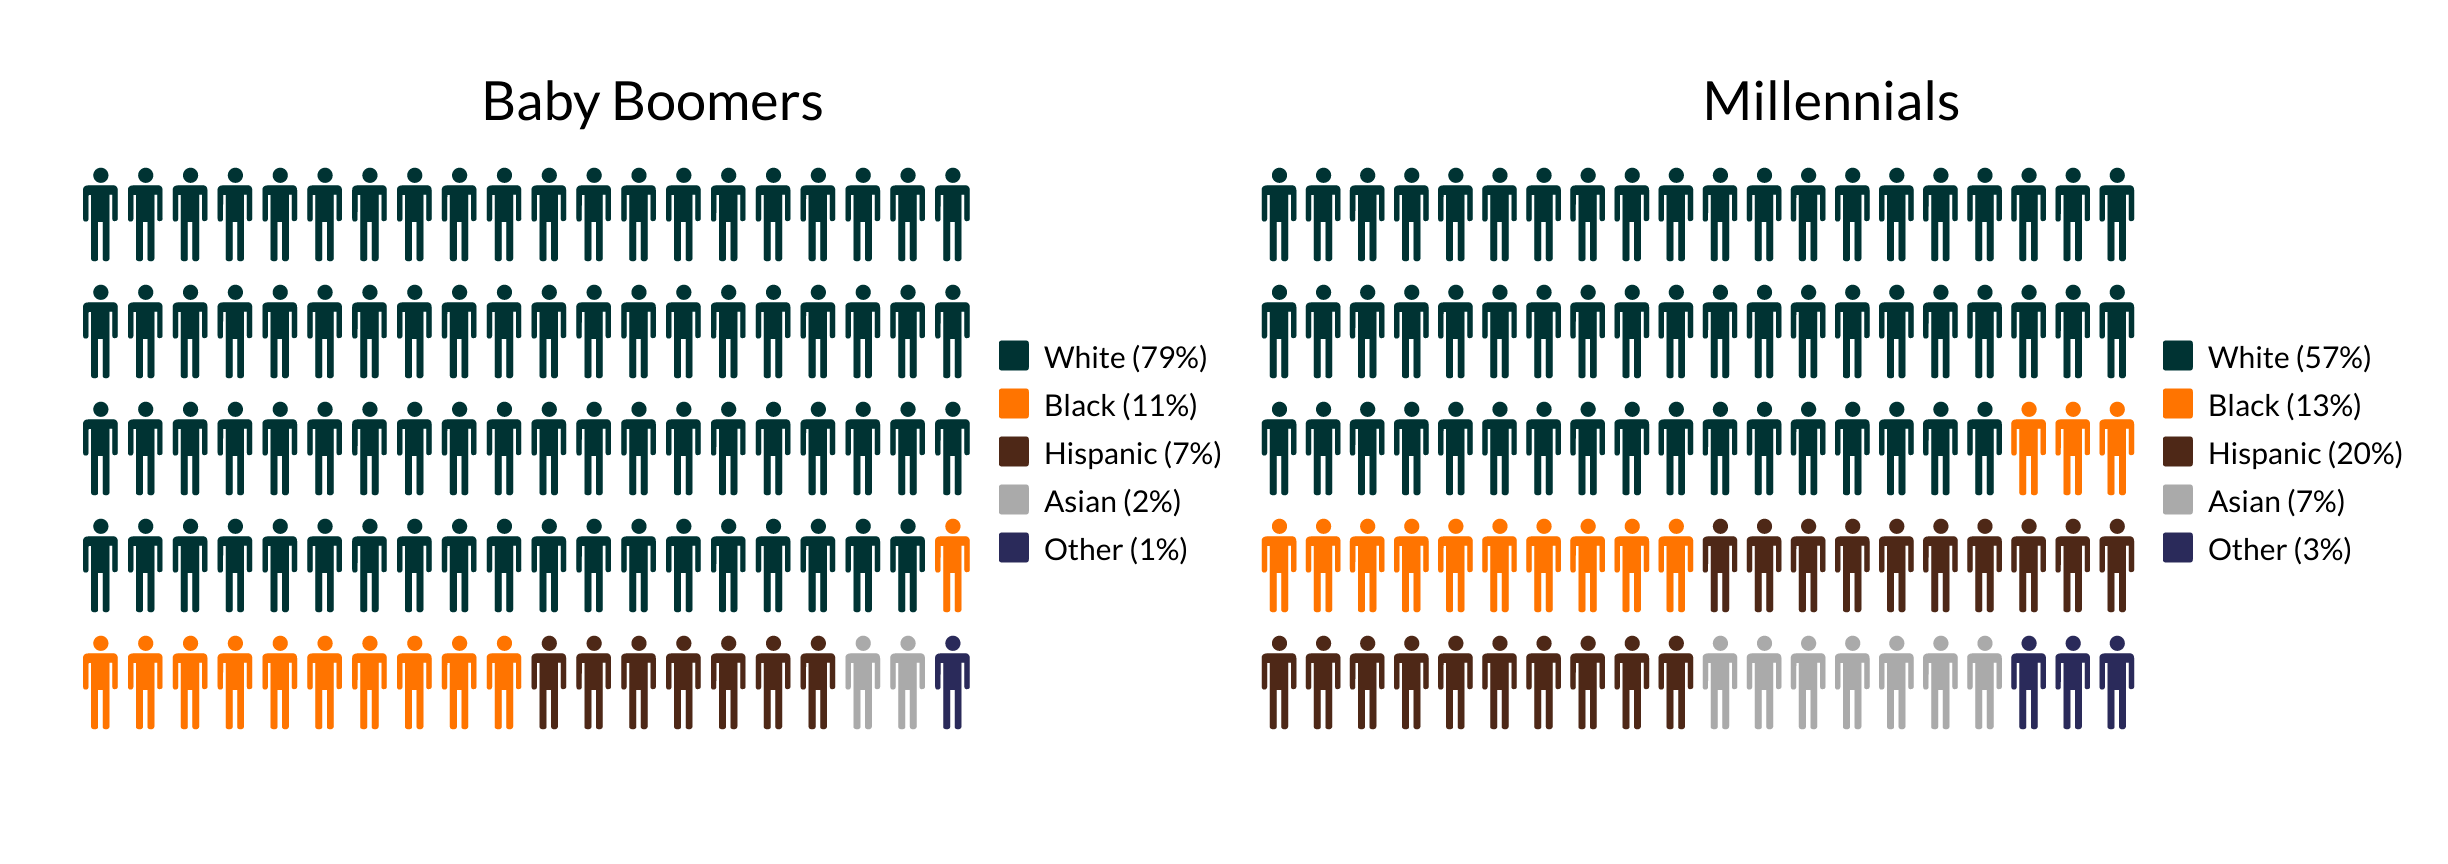 bar chart using different colors of people figures showing Figure 1. Racial and Ethnic Composition of Baby Boomers (1980) and Millennials (2015) Aged 25-34, 2015